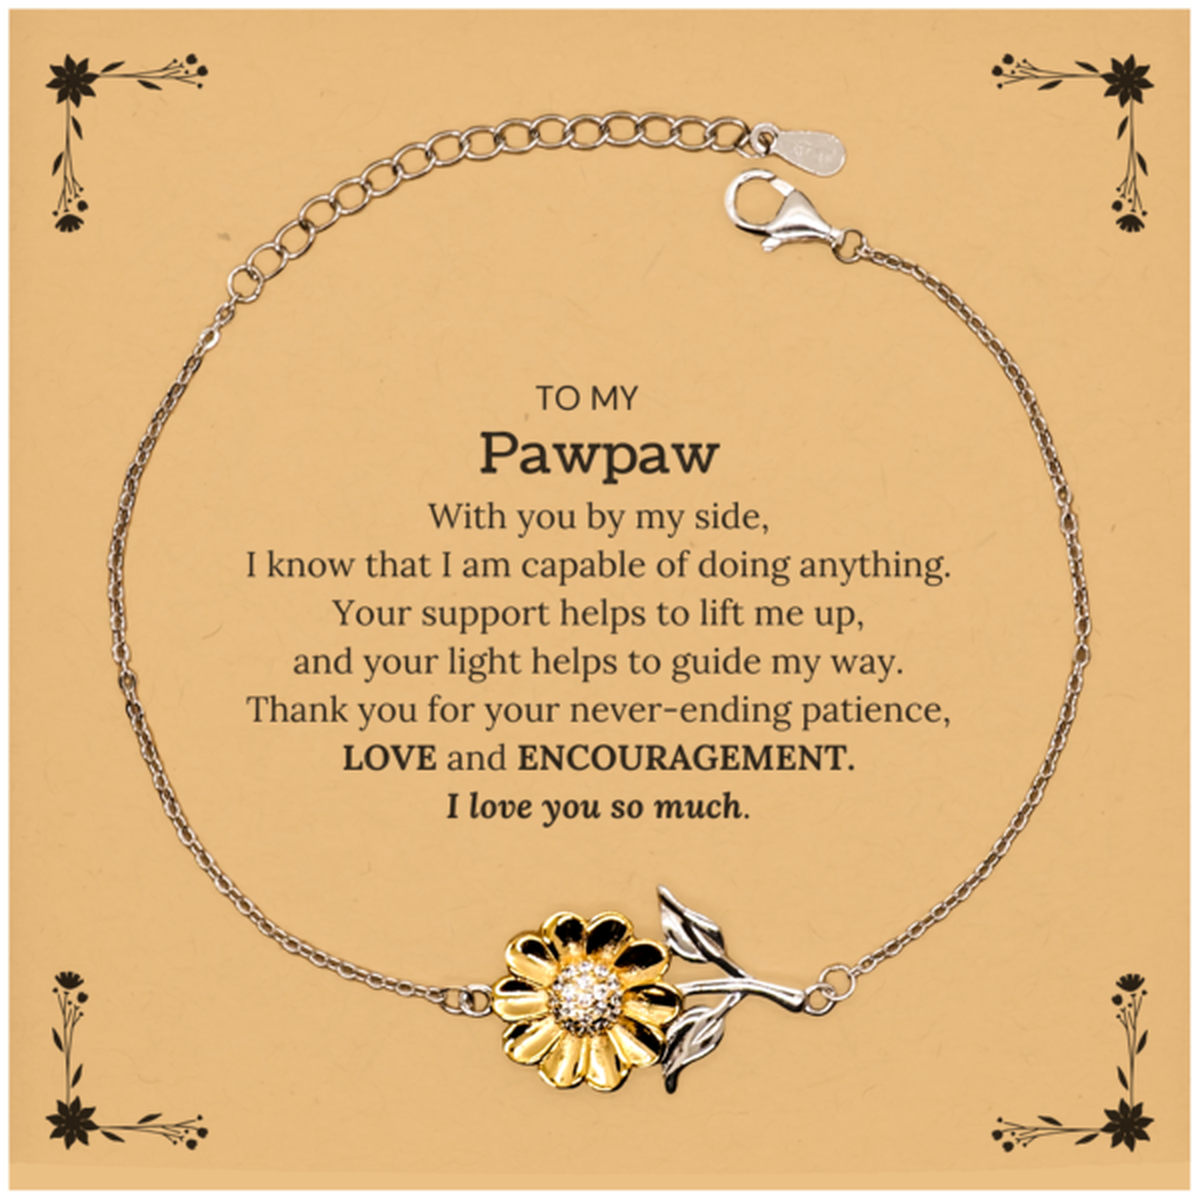 Appreciation Pawpaw Sunflower Bracelet Gifts, To My Pawpaw Birthday Christmas Wedding Keepsake Gifts for Pawpaw With you by my side, I know that I am capable of doing anything. I love you so much